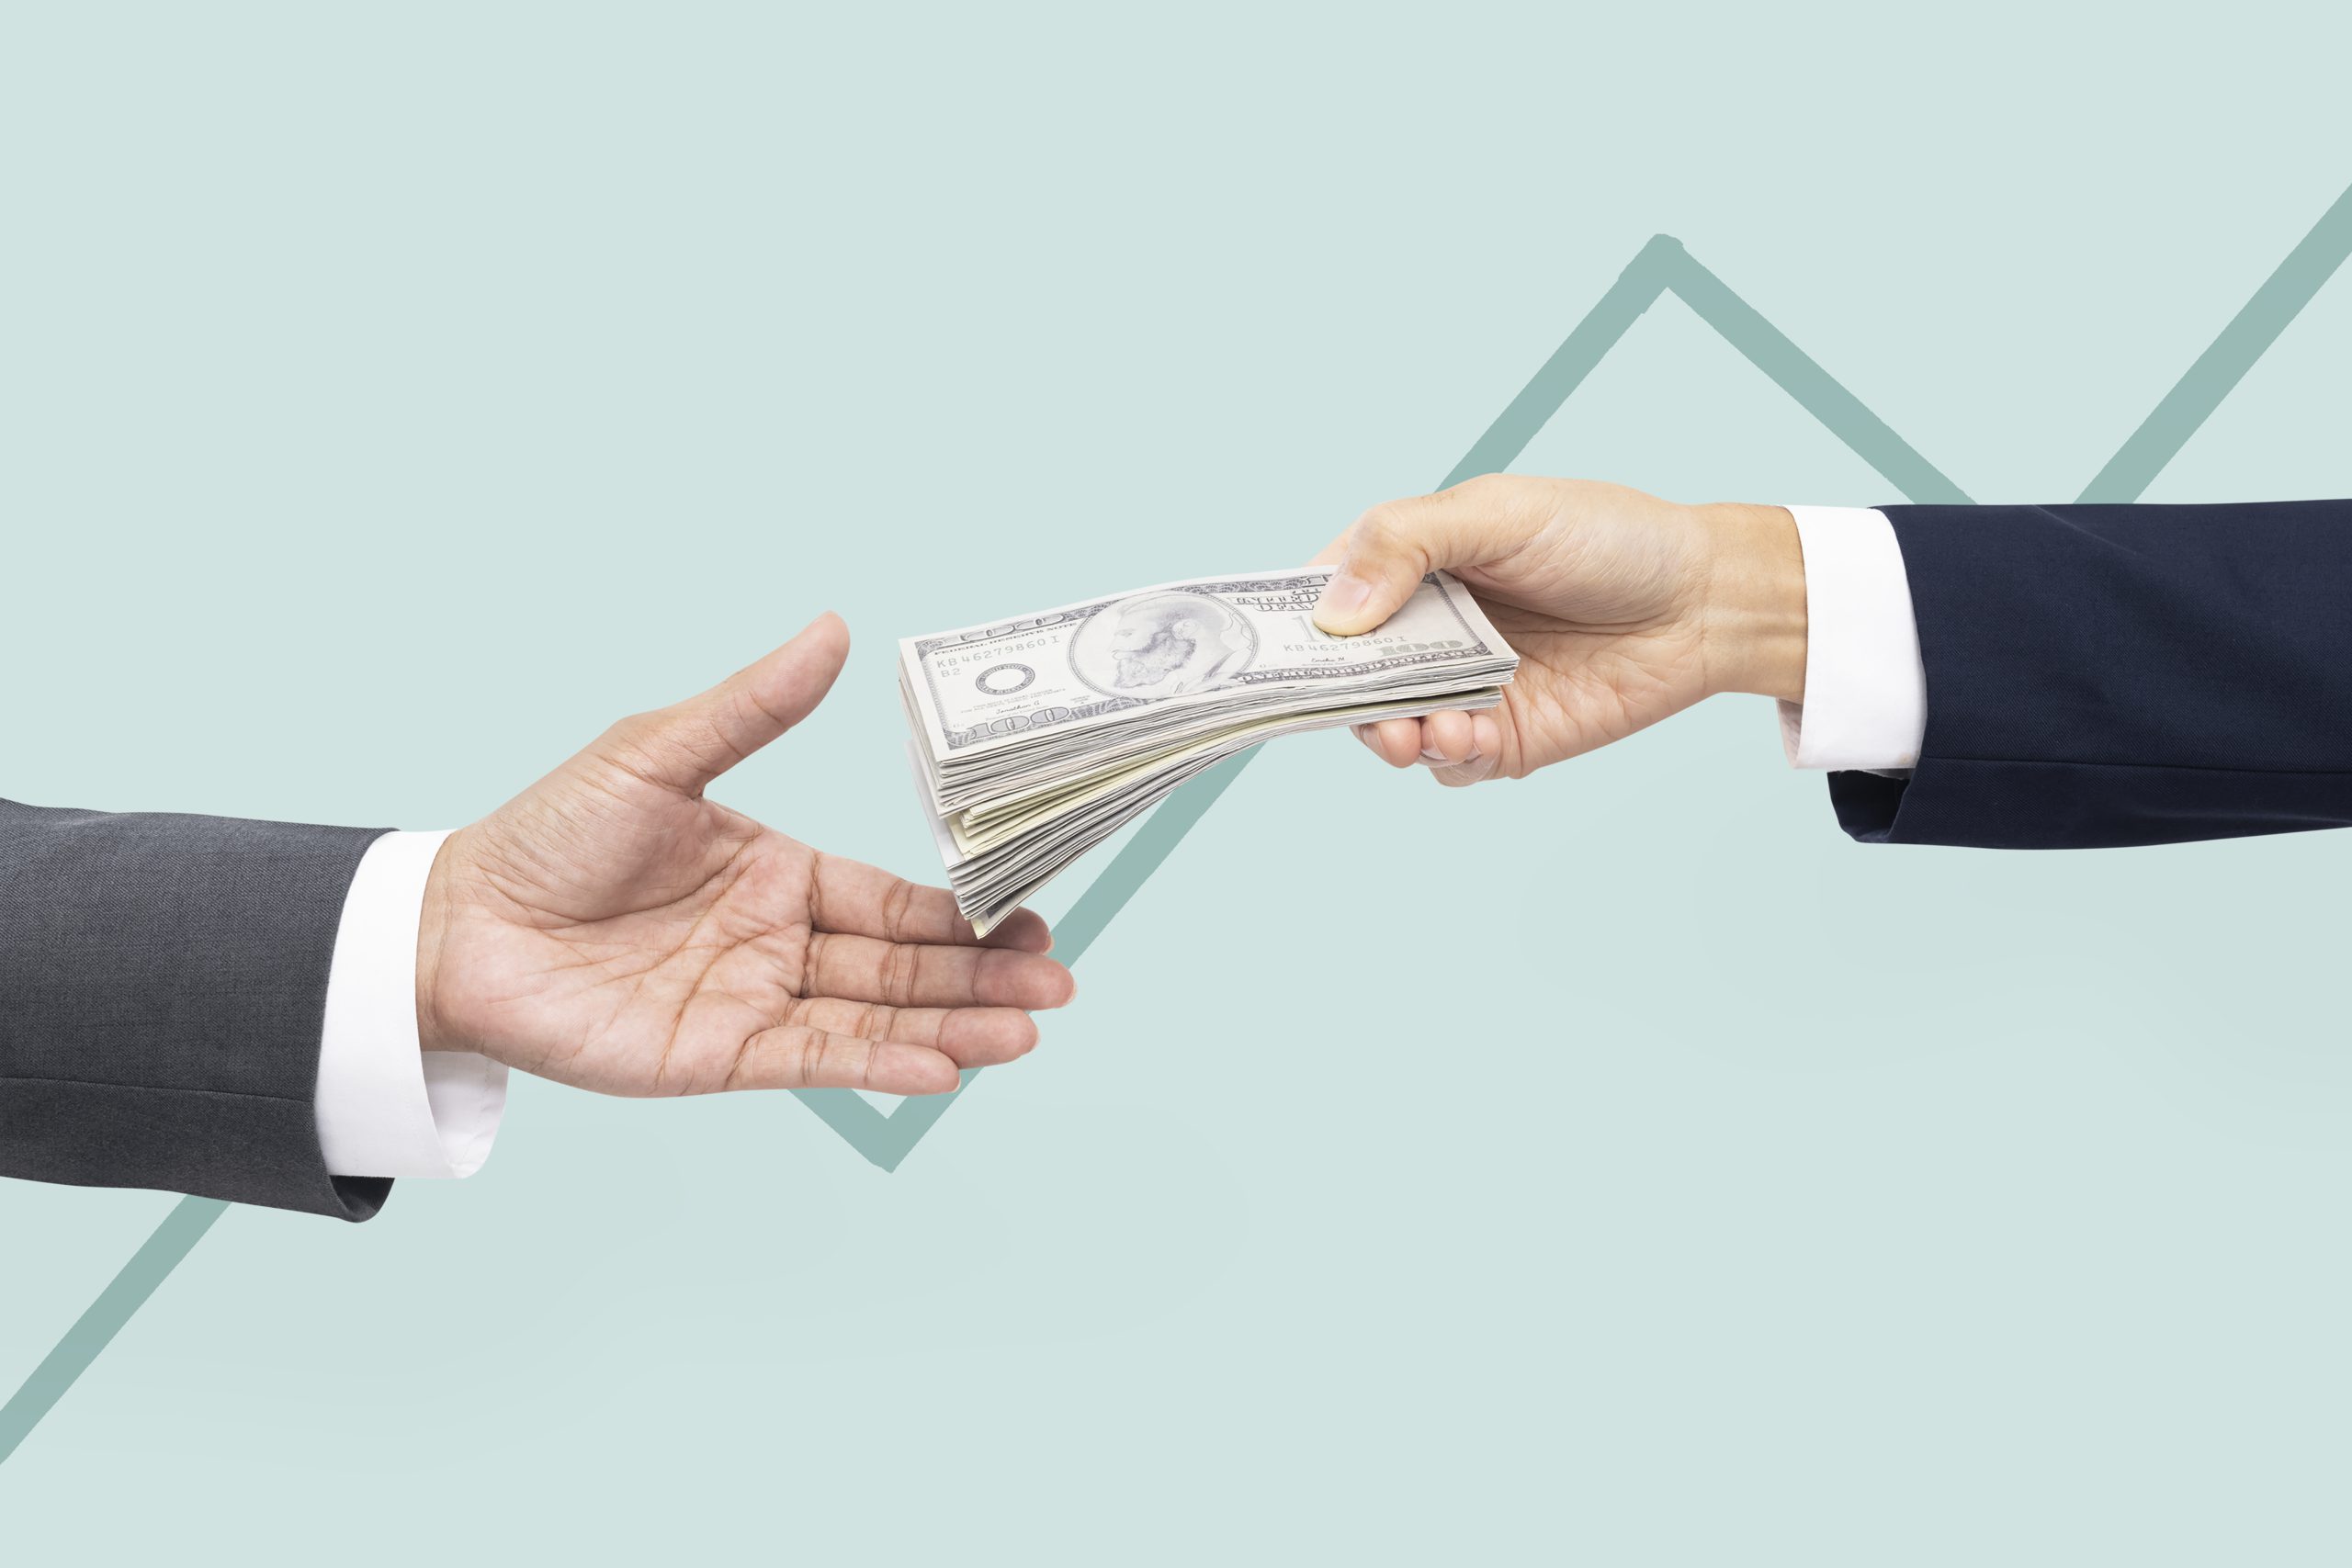 Business proposal purchase hands holding money